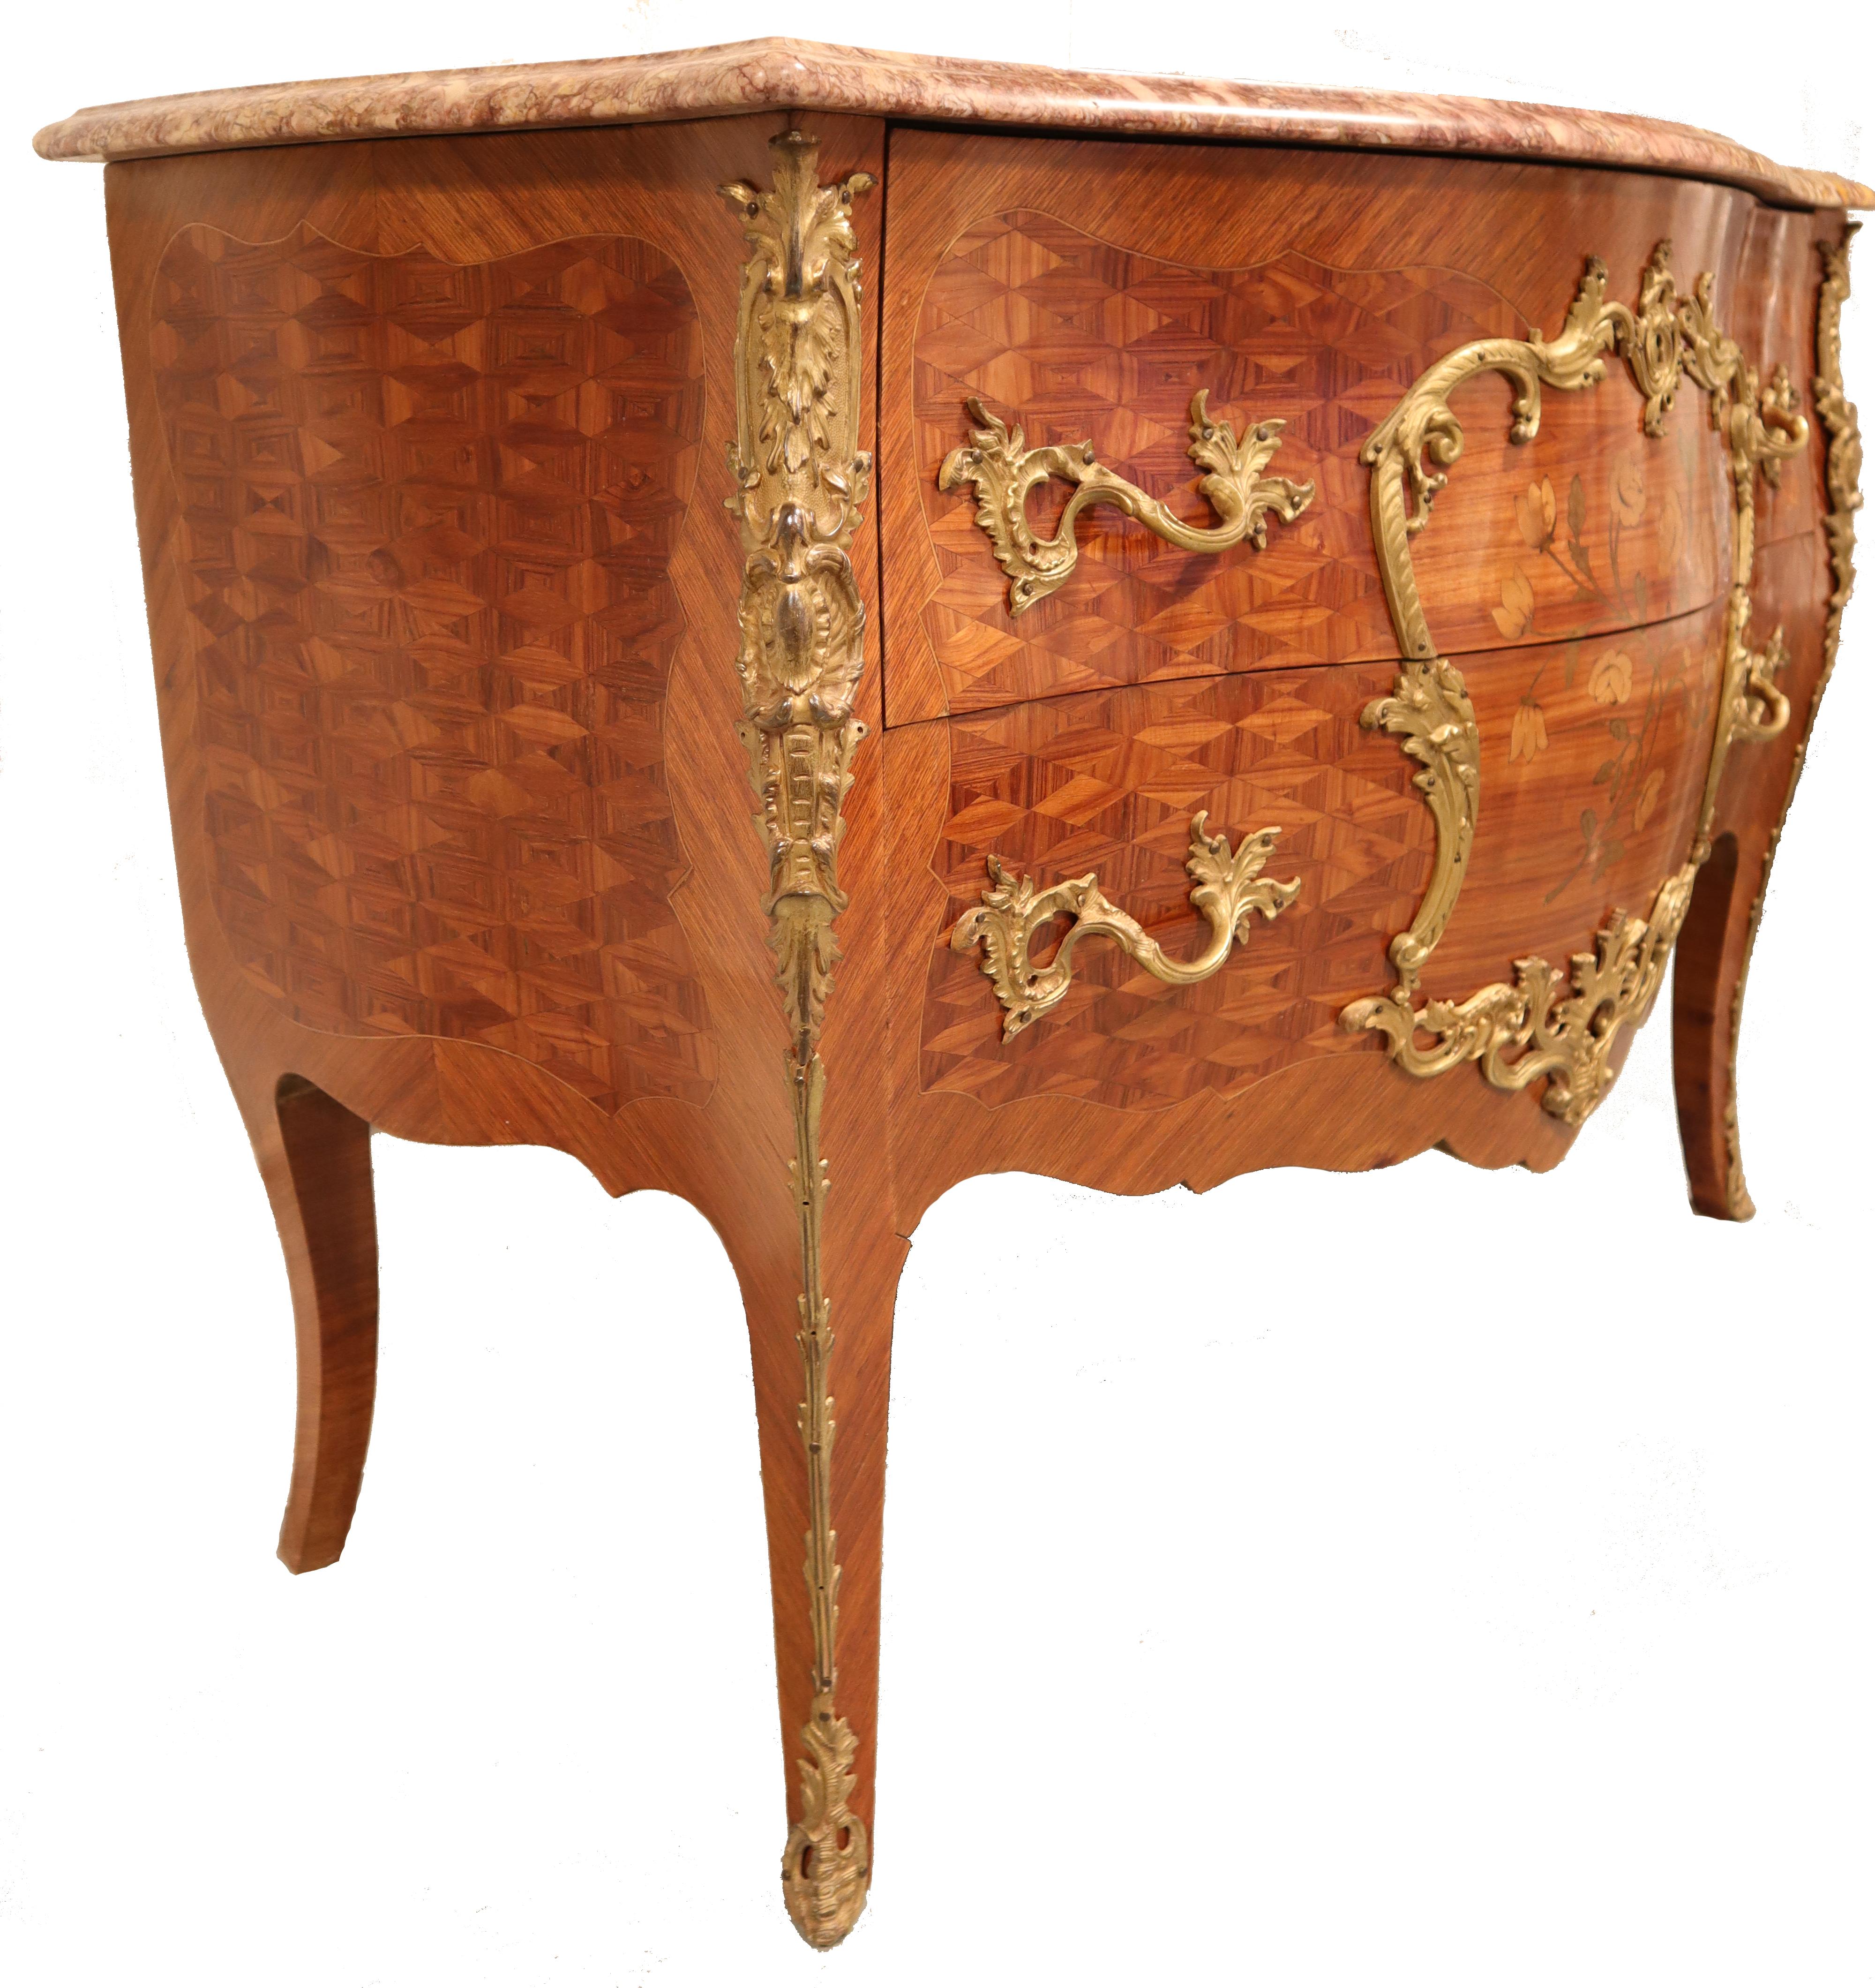 19th century French Louis XV Bombe marble top commode features exotic imported woods crafted in an exceedingly complex bombe shape, then adorned with lavish marquetry inlay, exquisite cast bronze ormolu mounts, and of course, a luxuriously veined